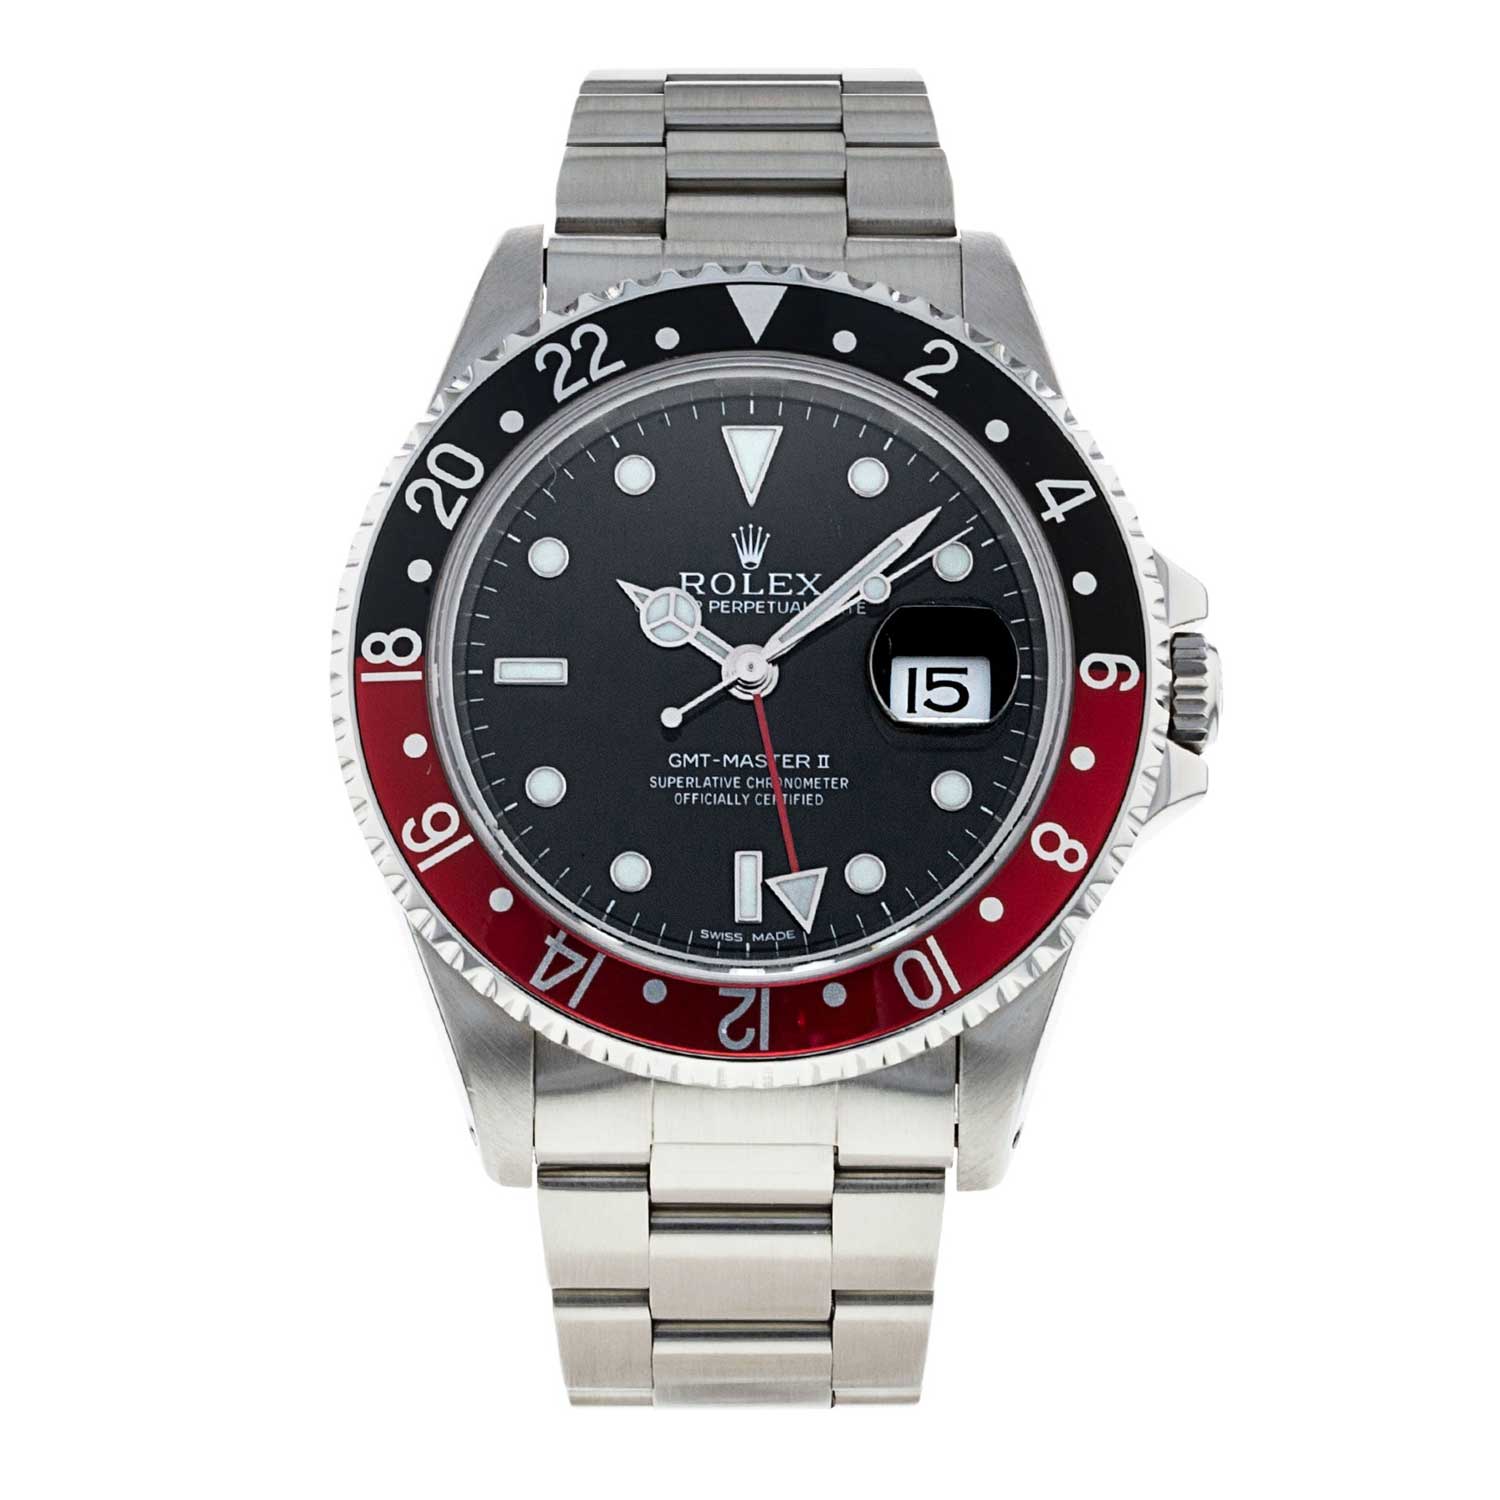 Rolex updated the GMT Master 2 line with the reference 16710 in 1989